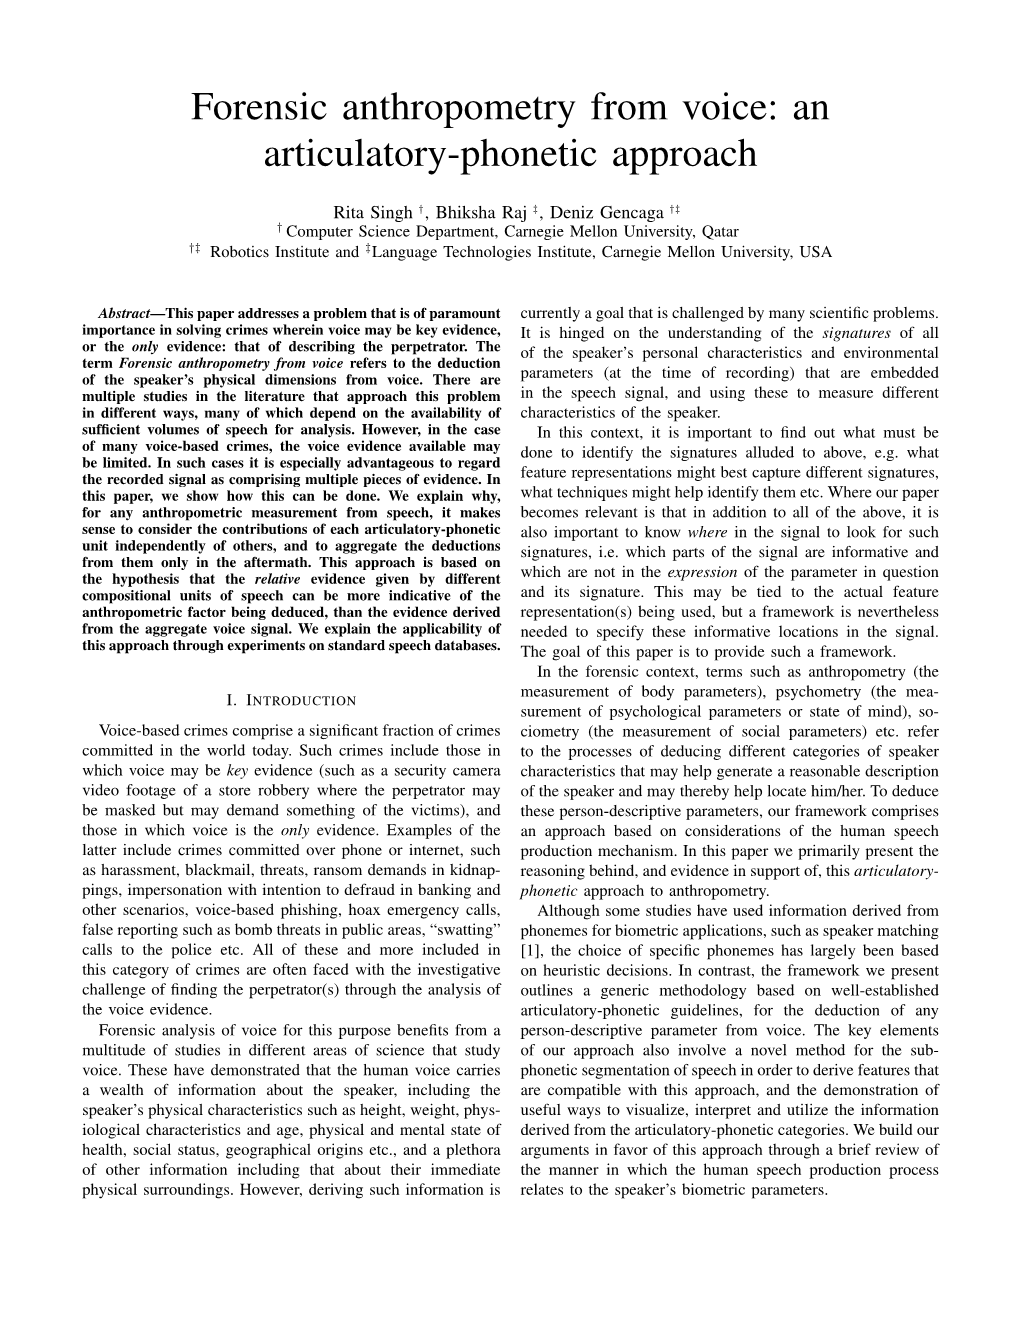 Forensic Anthropometry from Voice: an Articulatory-Phonetic Approach